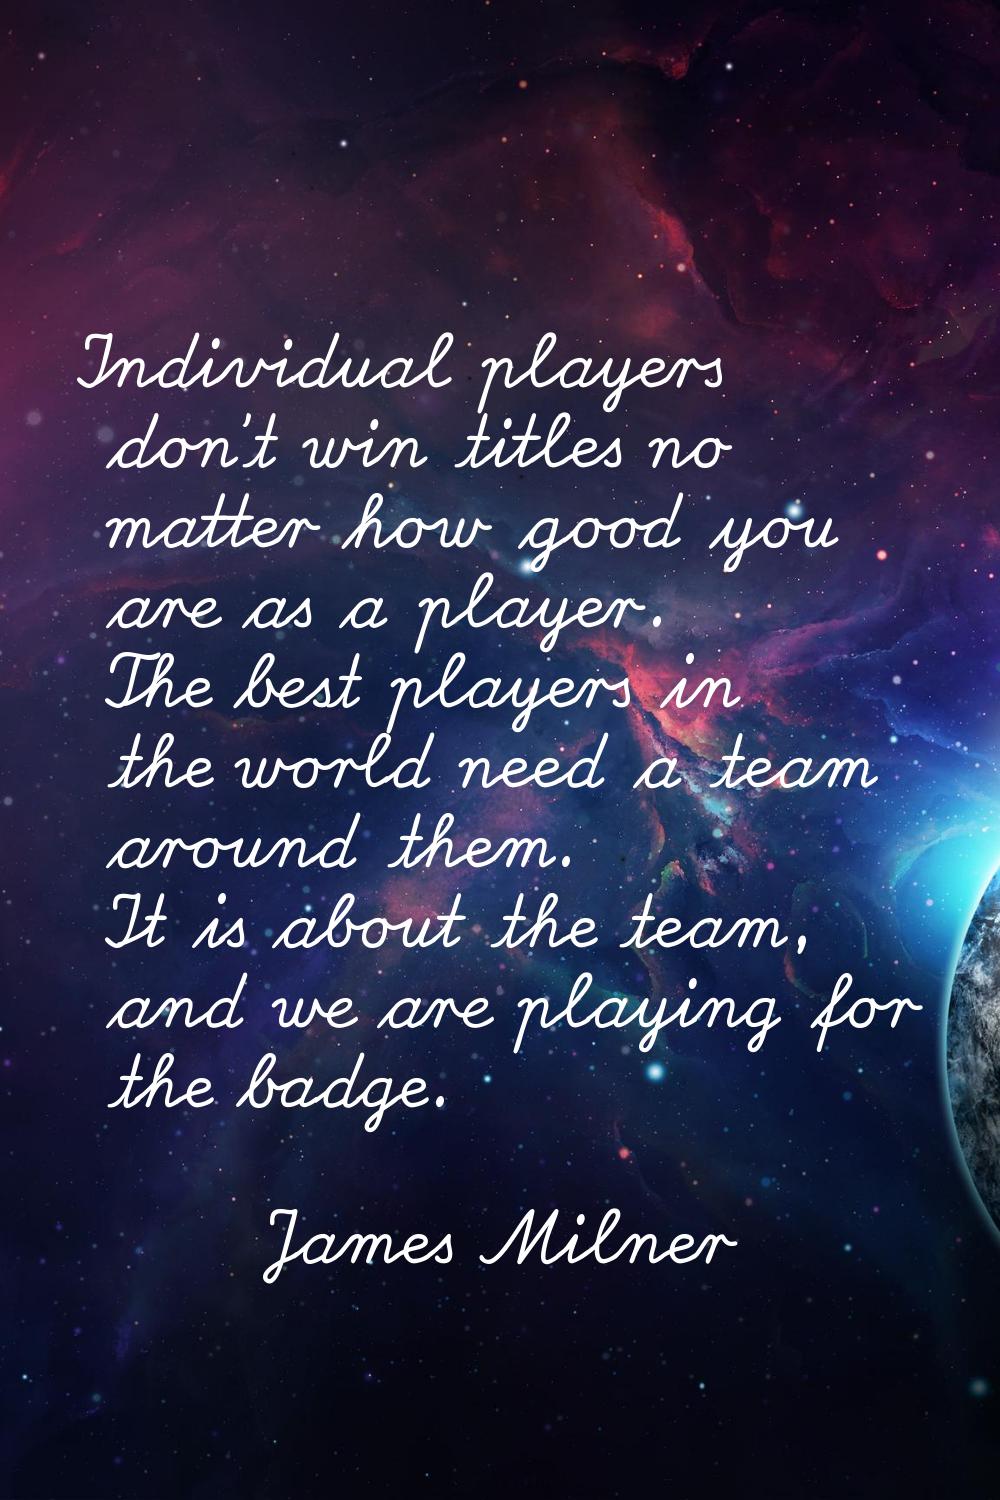 Individual players don't win titles no matter how good you are as a player. The best players in the